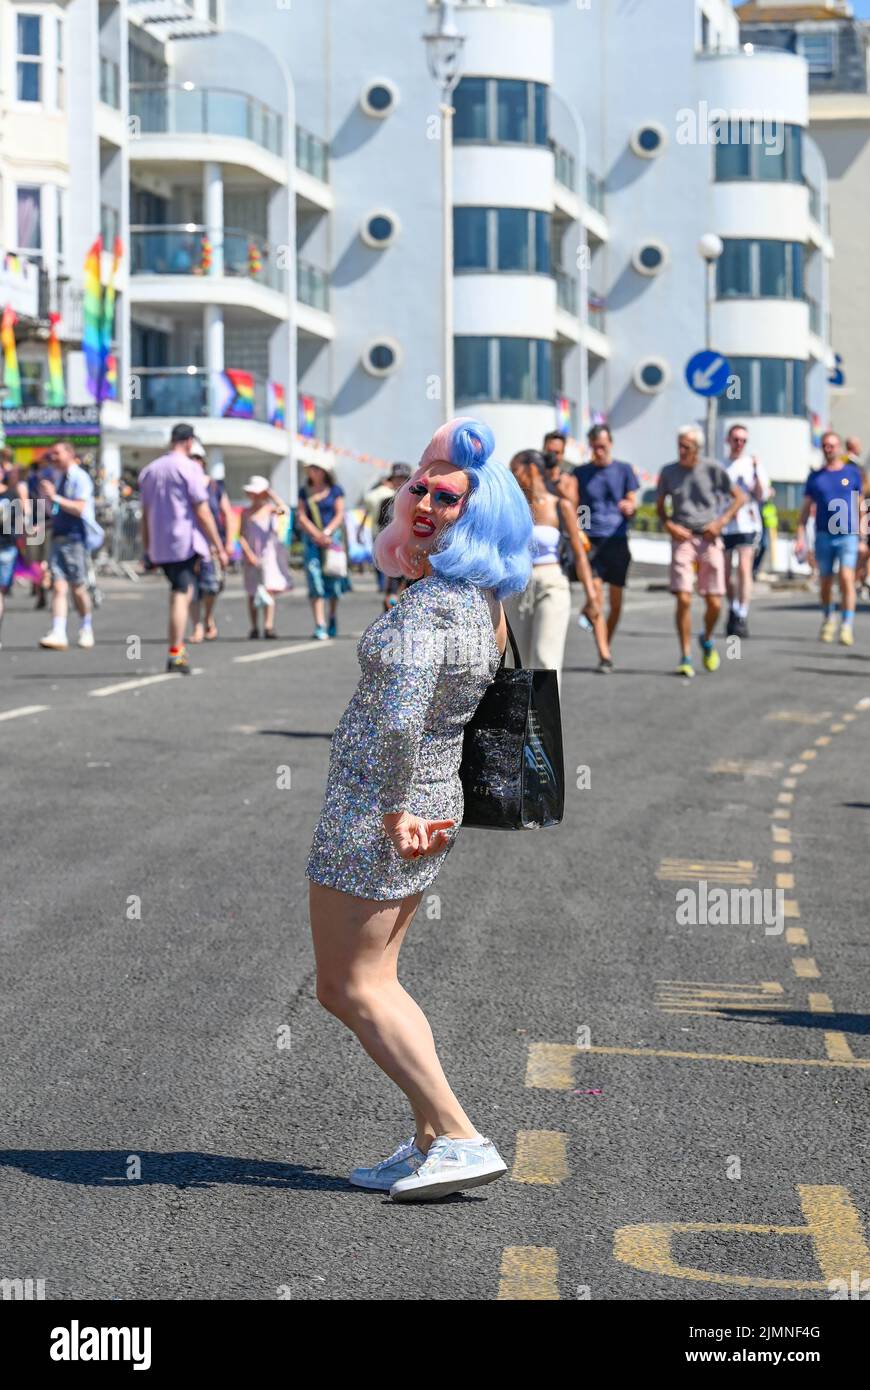 Brighton UK 7th August 2022 - Visitors enjoy the hot sunny weather in brighton during the Pride Festival Weekend celebrations . More hot weather is forecast for parts of the UK over the next week with temperatures expected to go above 30 degrees again : Credit Simon Dack / Alamy Live News Stock Photo